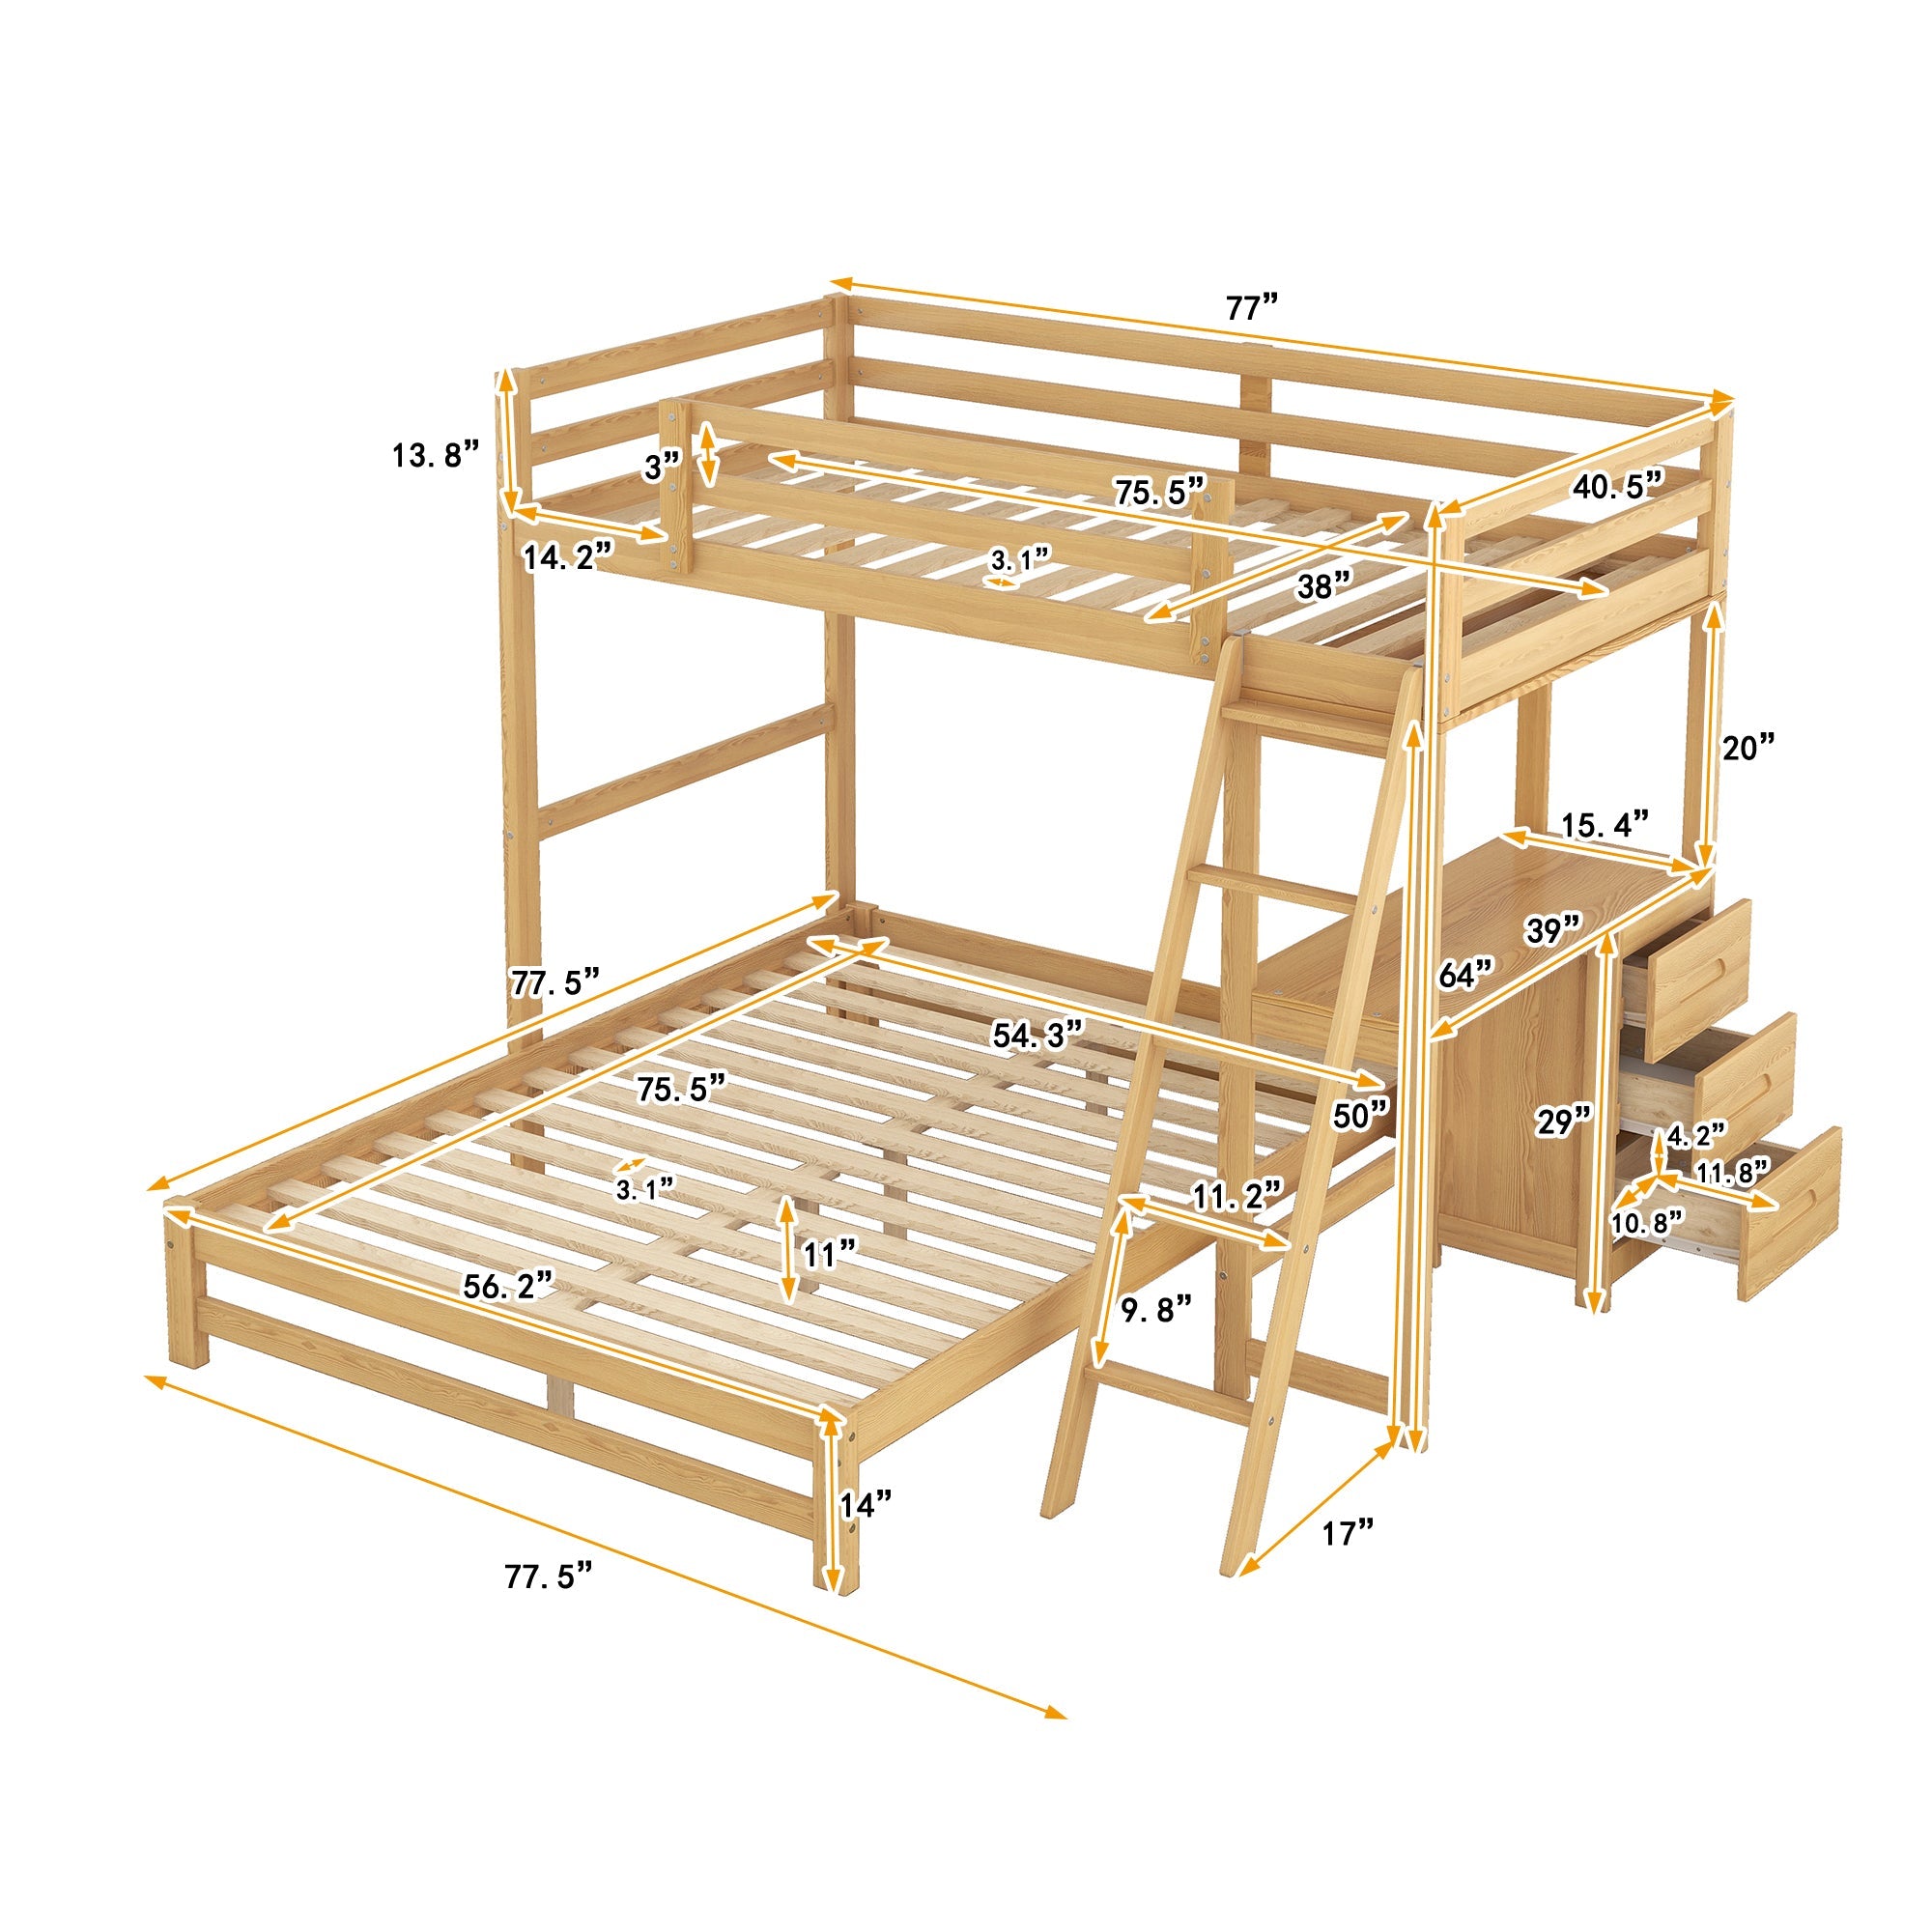 EUROCO Twin over Full Bunk Bed with Desk and Drawers for Kids, Natural